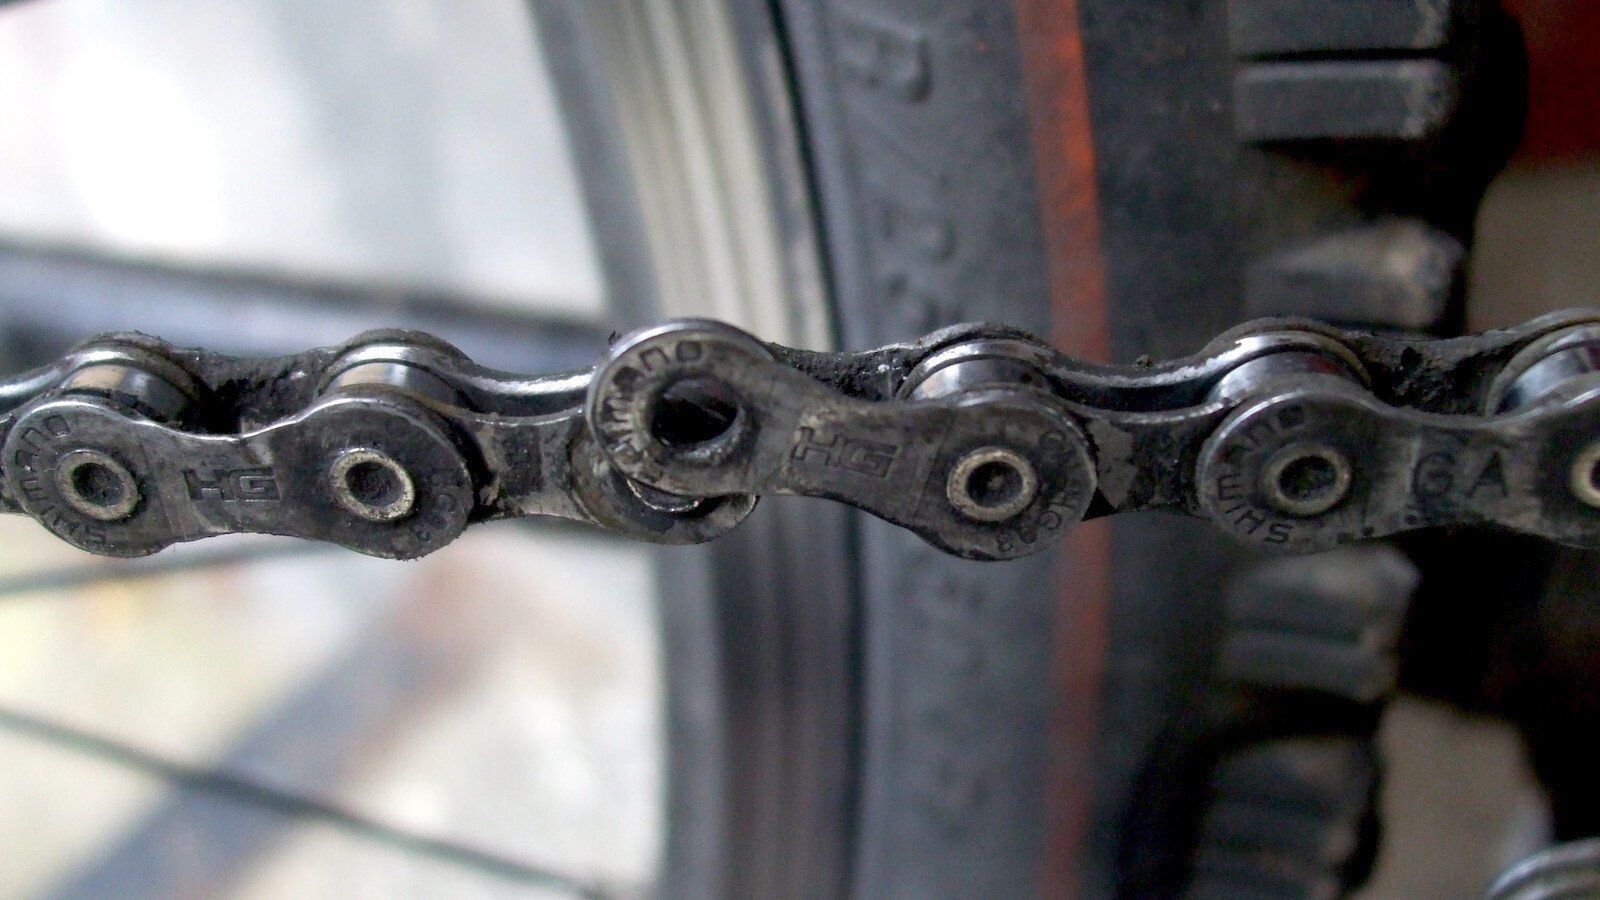 How to fix and tools needed to repair a bike chain